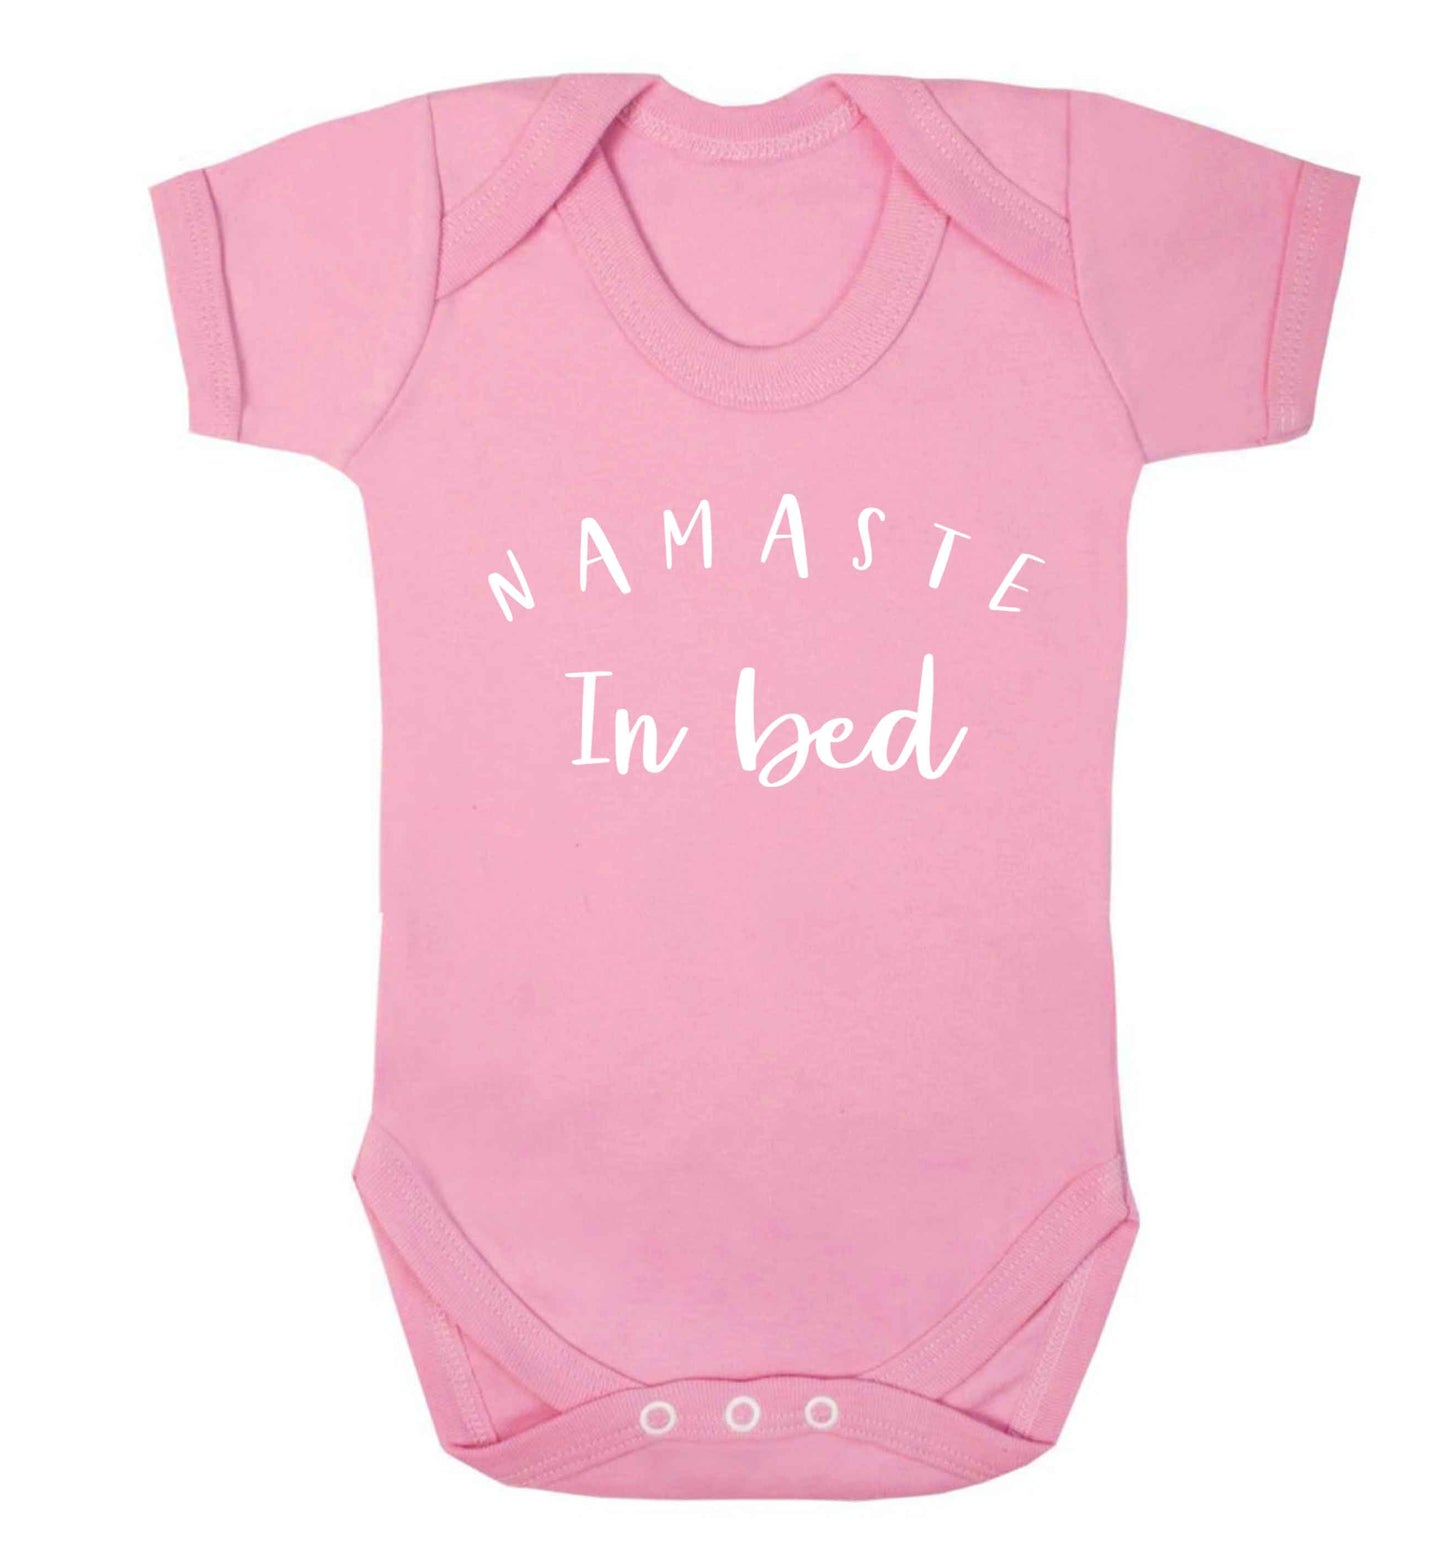 Namaste in bed Baby Vest pale pink 18-24 months